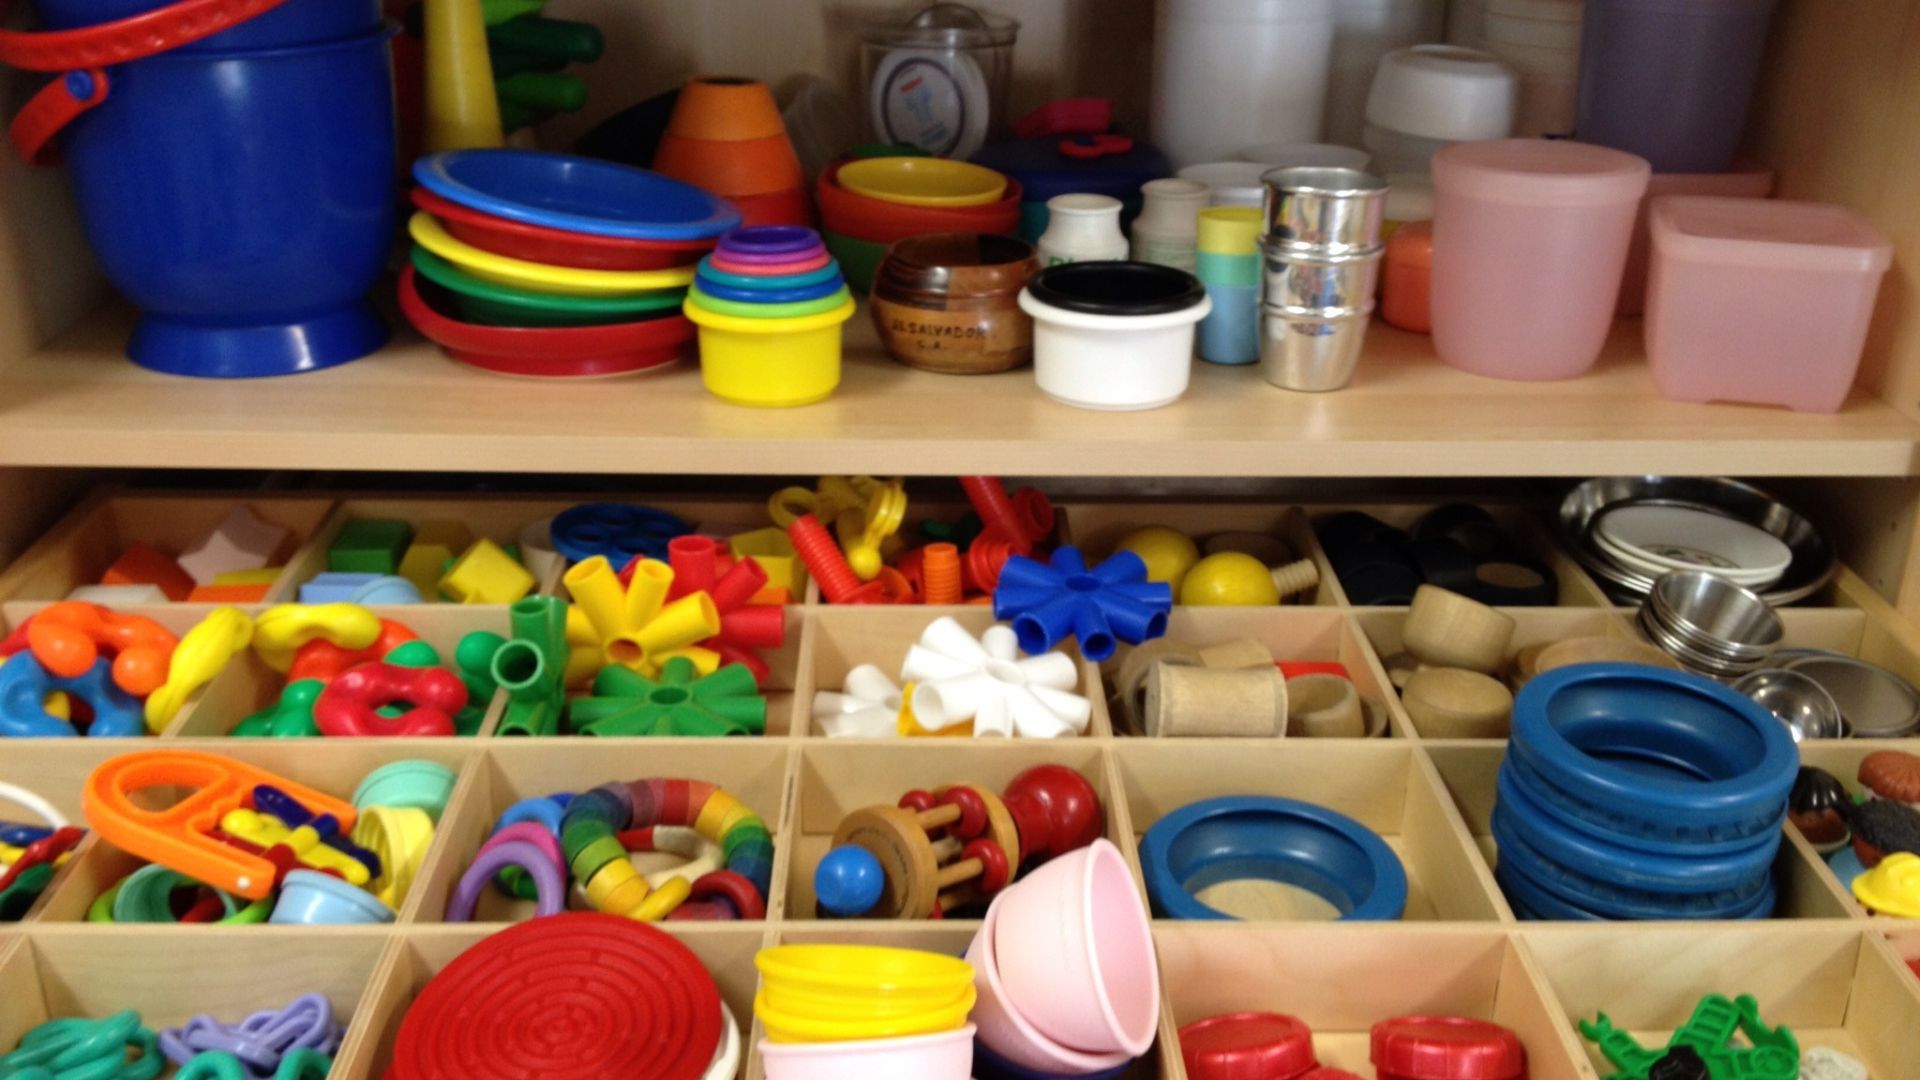 BW Photo of an assortment of play objects from the play object closet at RIE® Hollywood Center.